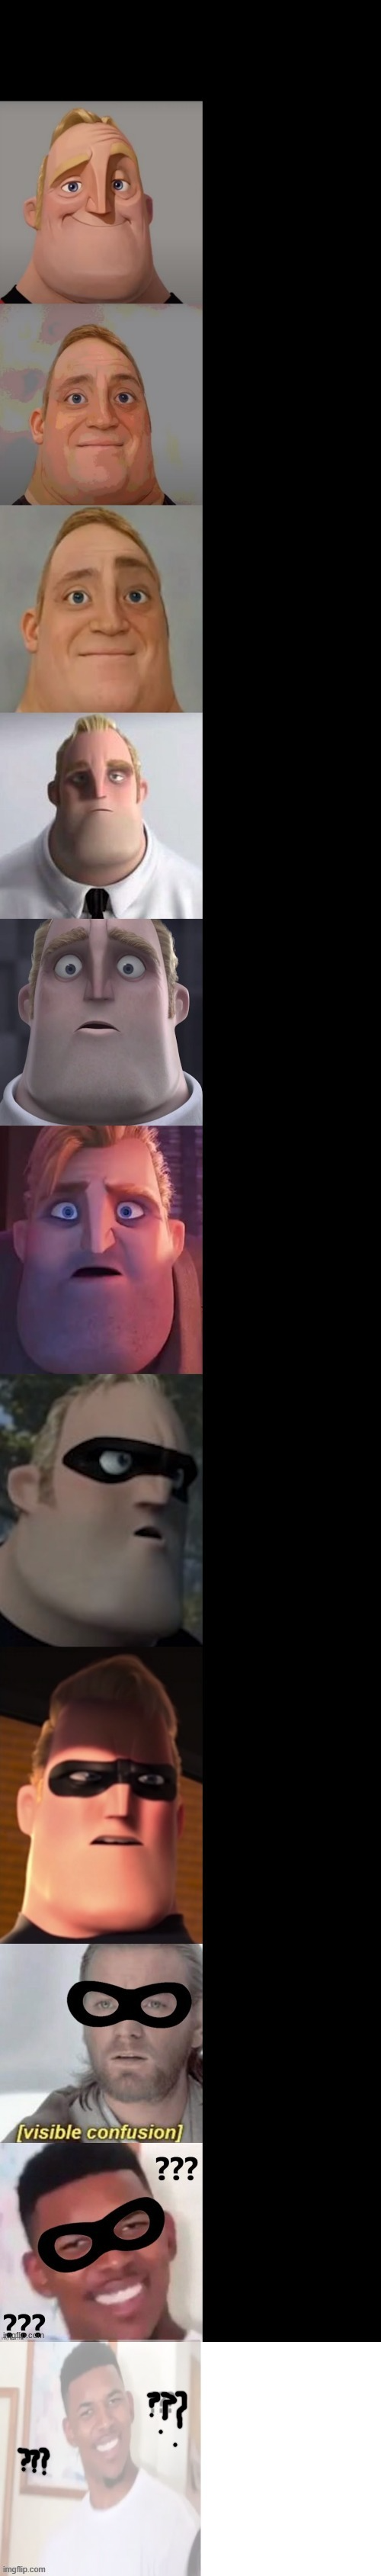 Mr Incredible becoming confused Extended Blank Meme Template